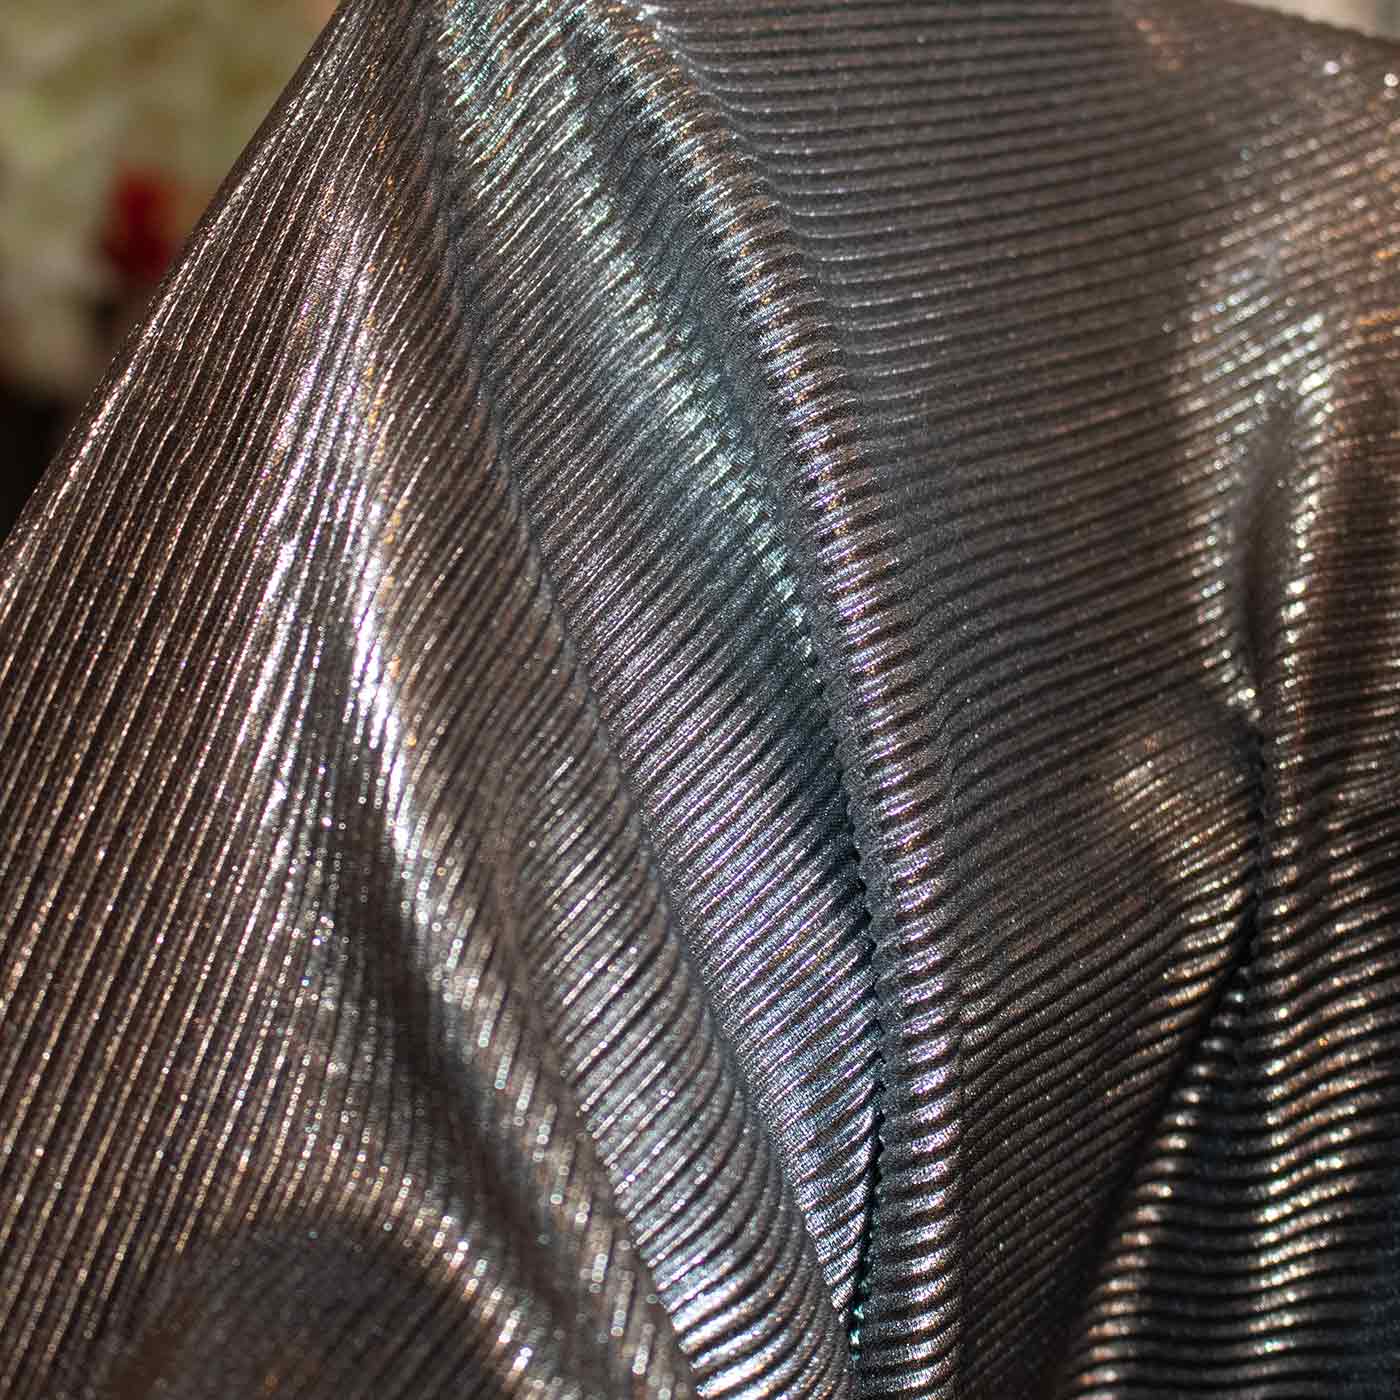 Bronze and Silver Quality Plisse Lurex Fabric